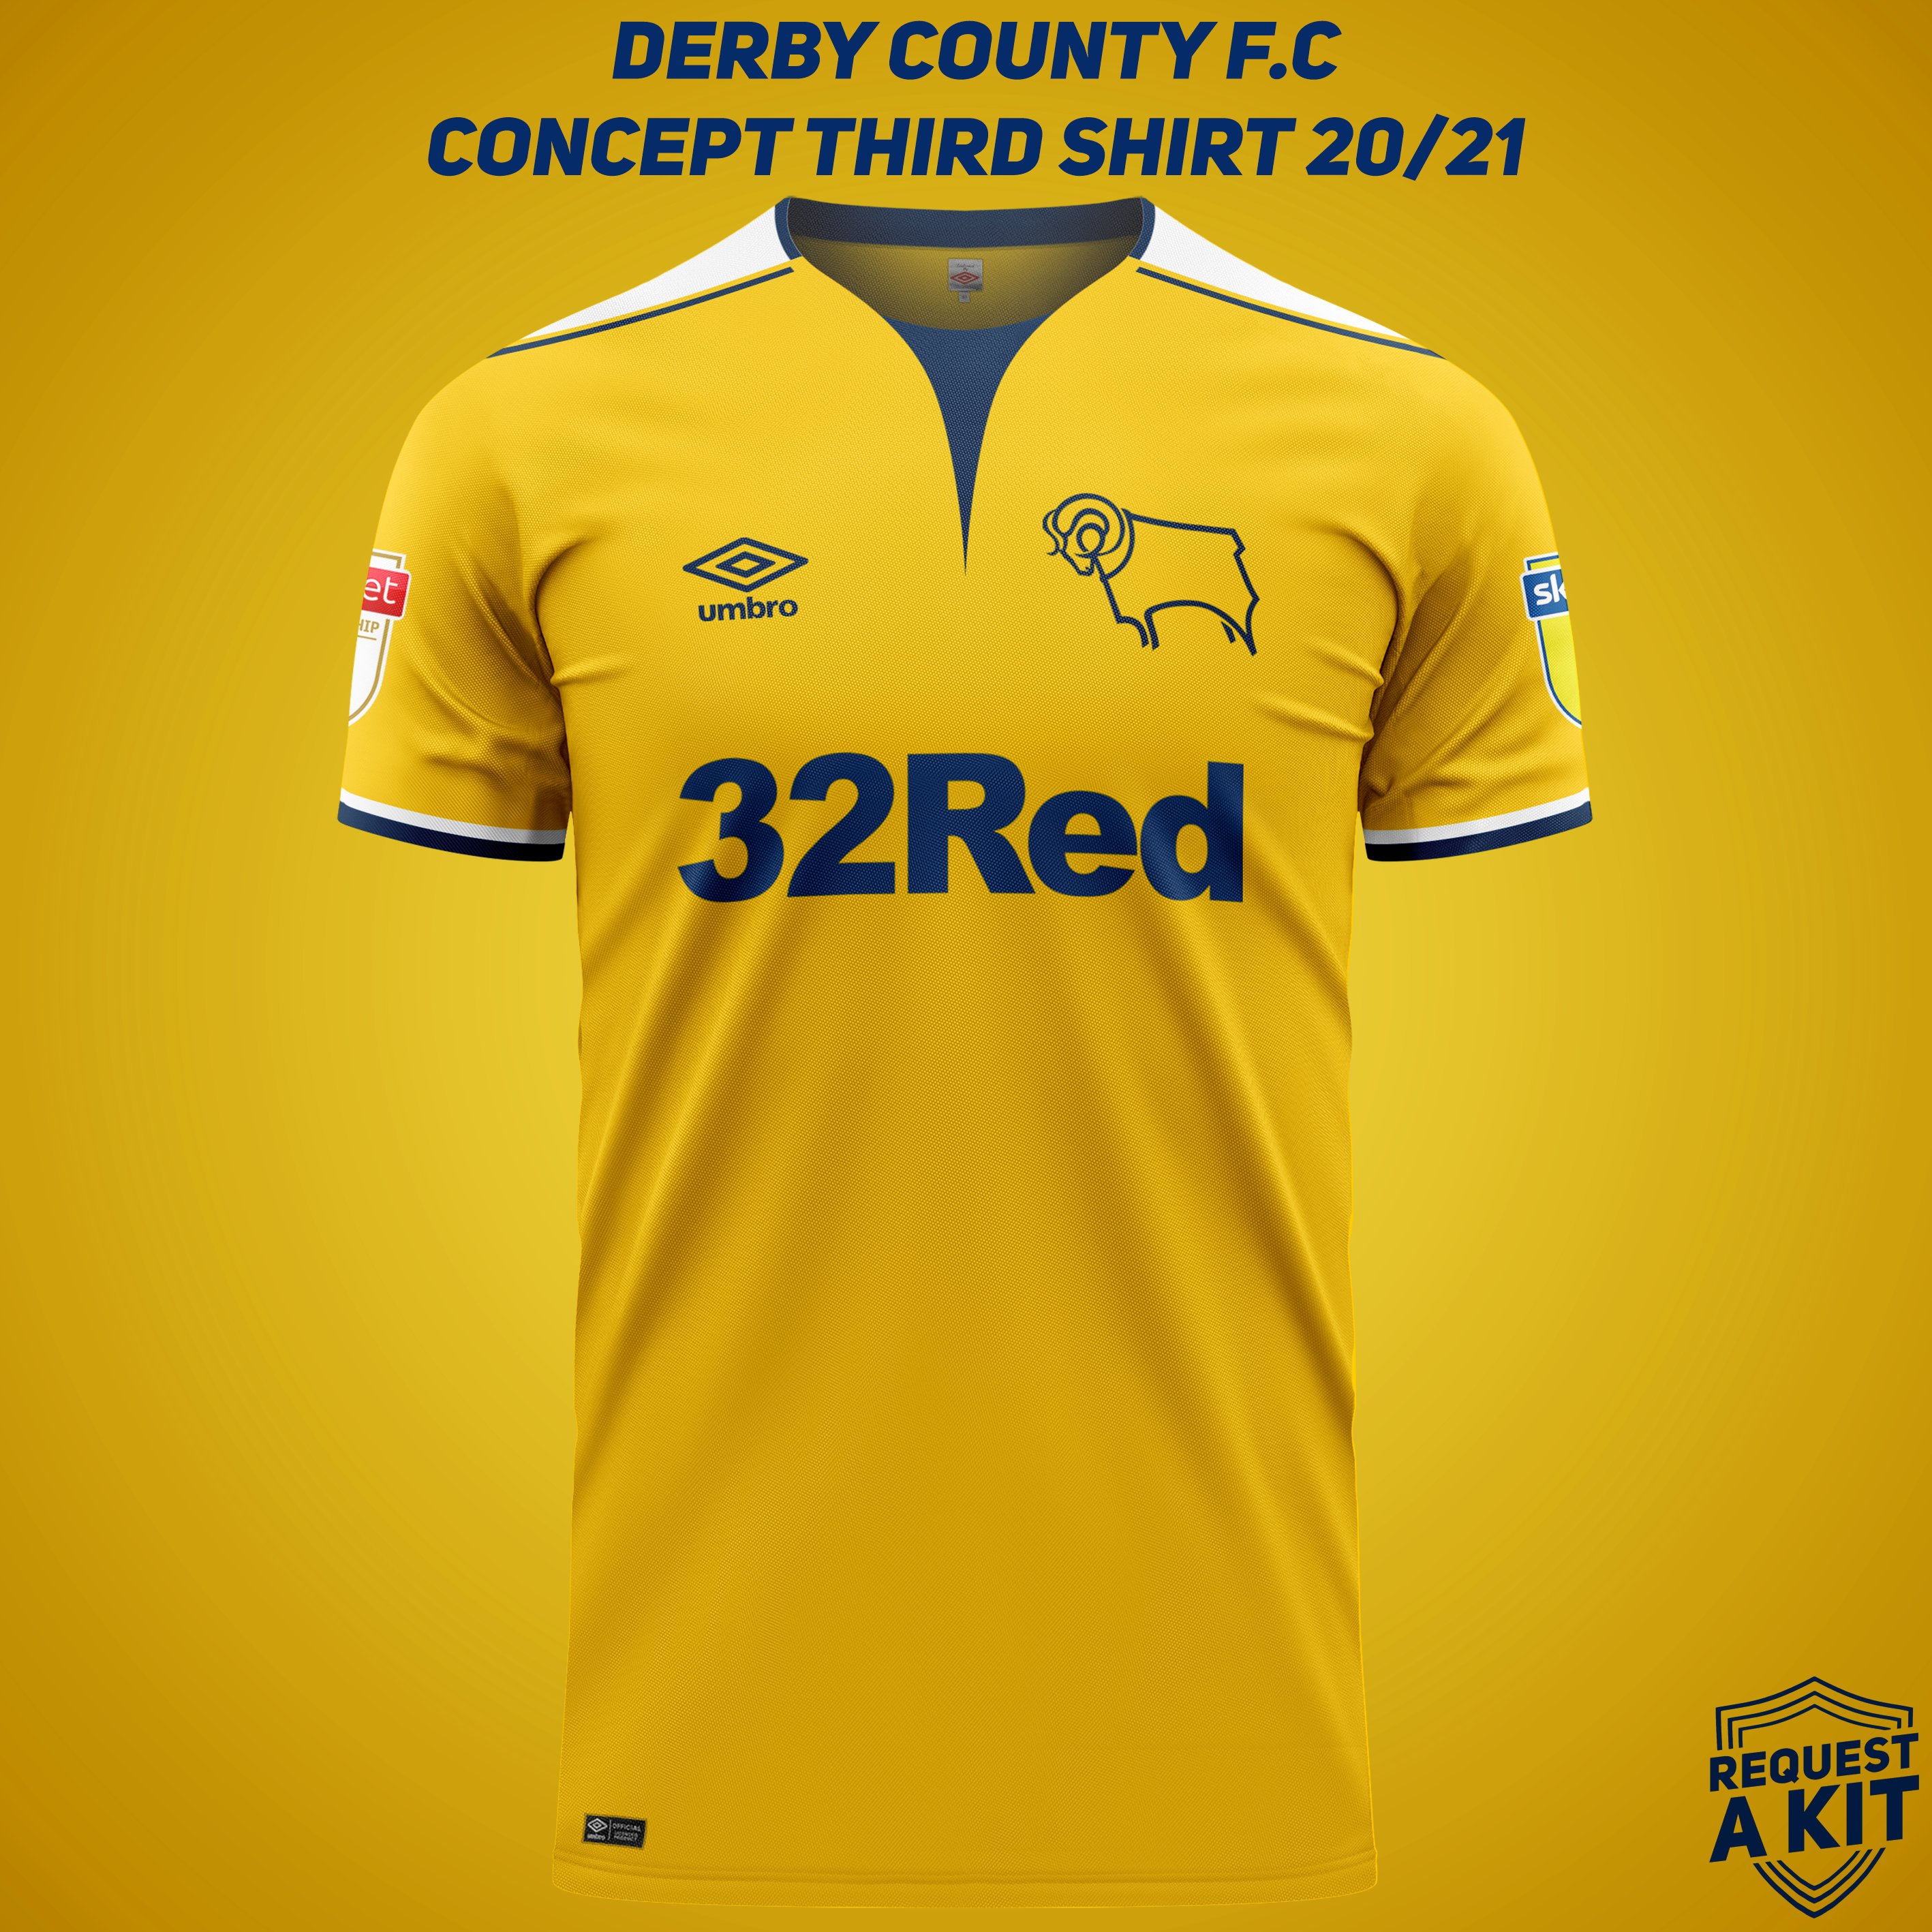 Request A Kit on Twitter: "Derby County F.C Concept Home, Away and Third Shirts  2020-21 (requested by @dcfc_live) #derby #derbycounty #dcfc #rams #dcfcfans  #FM20 #wearethecommunity https://t.co/3I6UKvTzoP" / Twitter